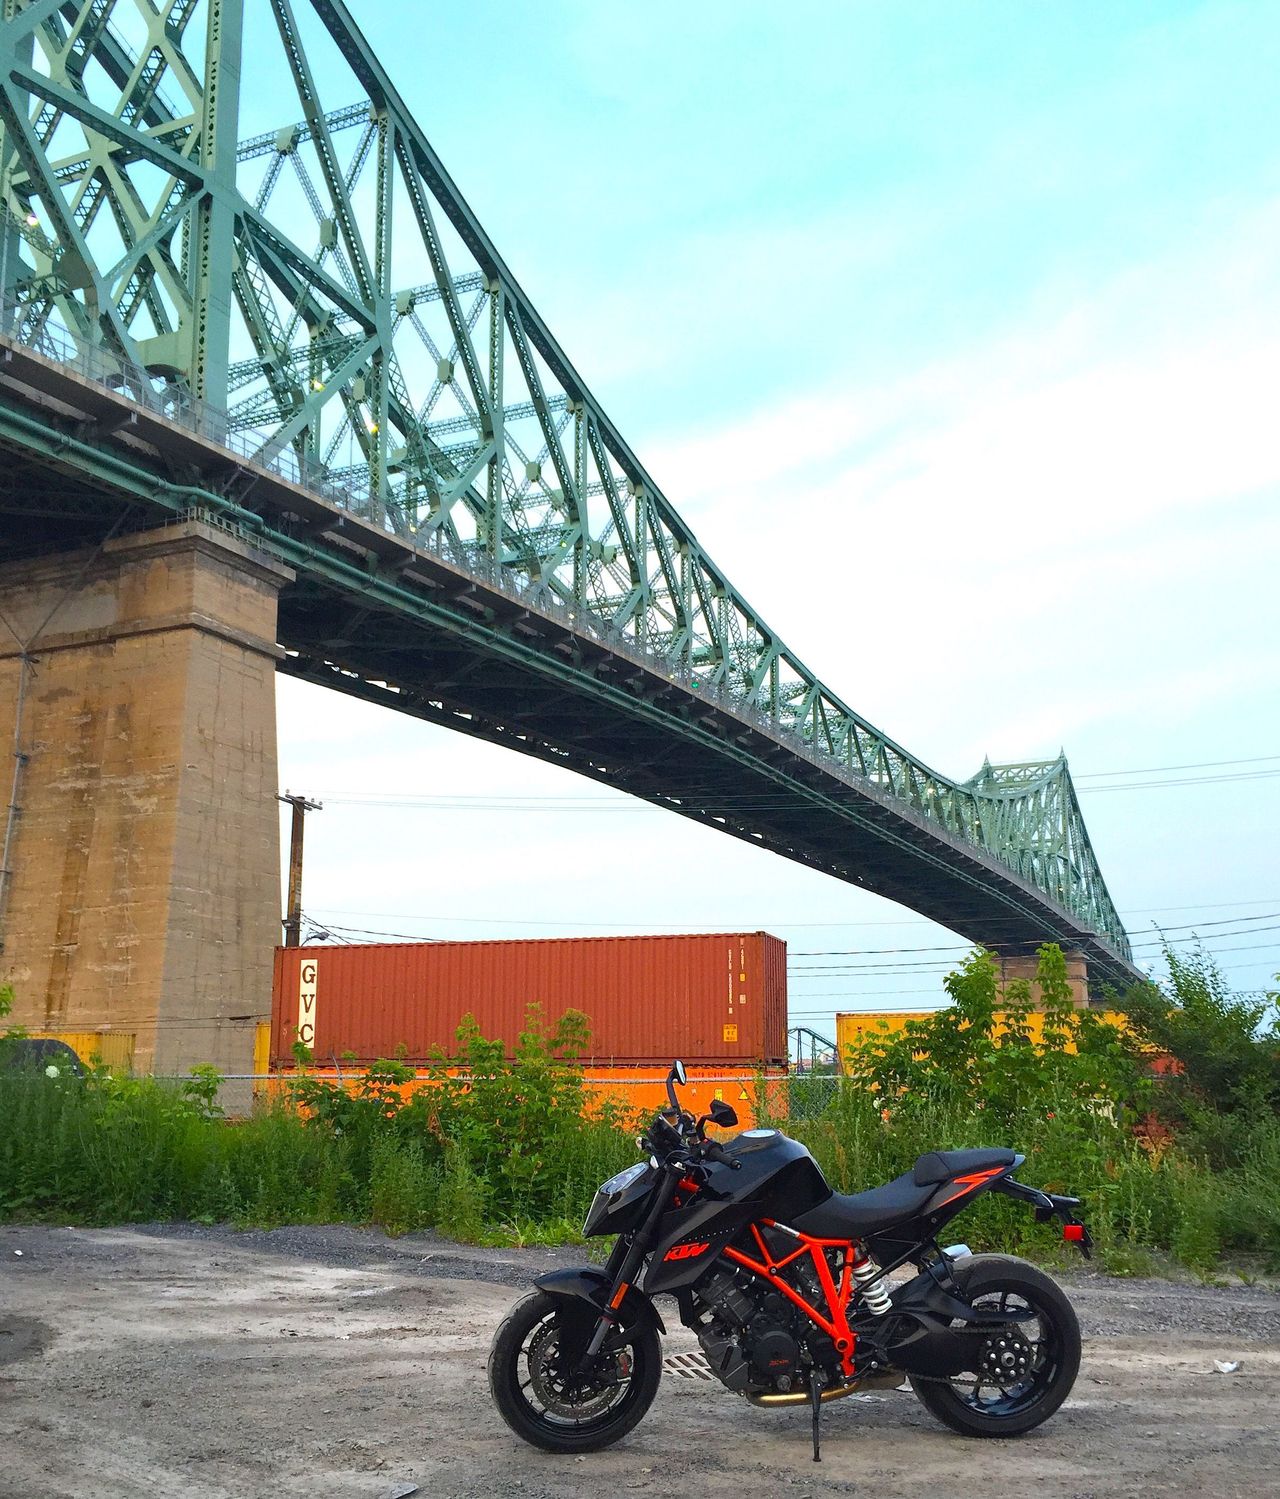 2015 SuperDuke 1290R taking the road less travelled outside of Montreal